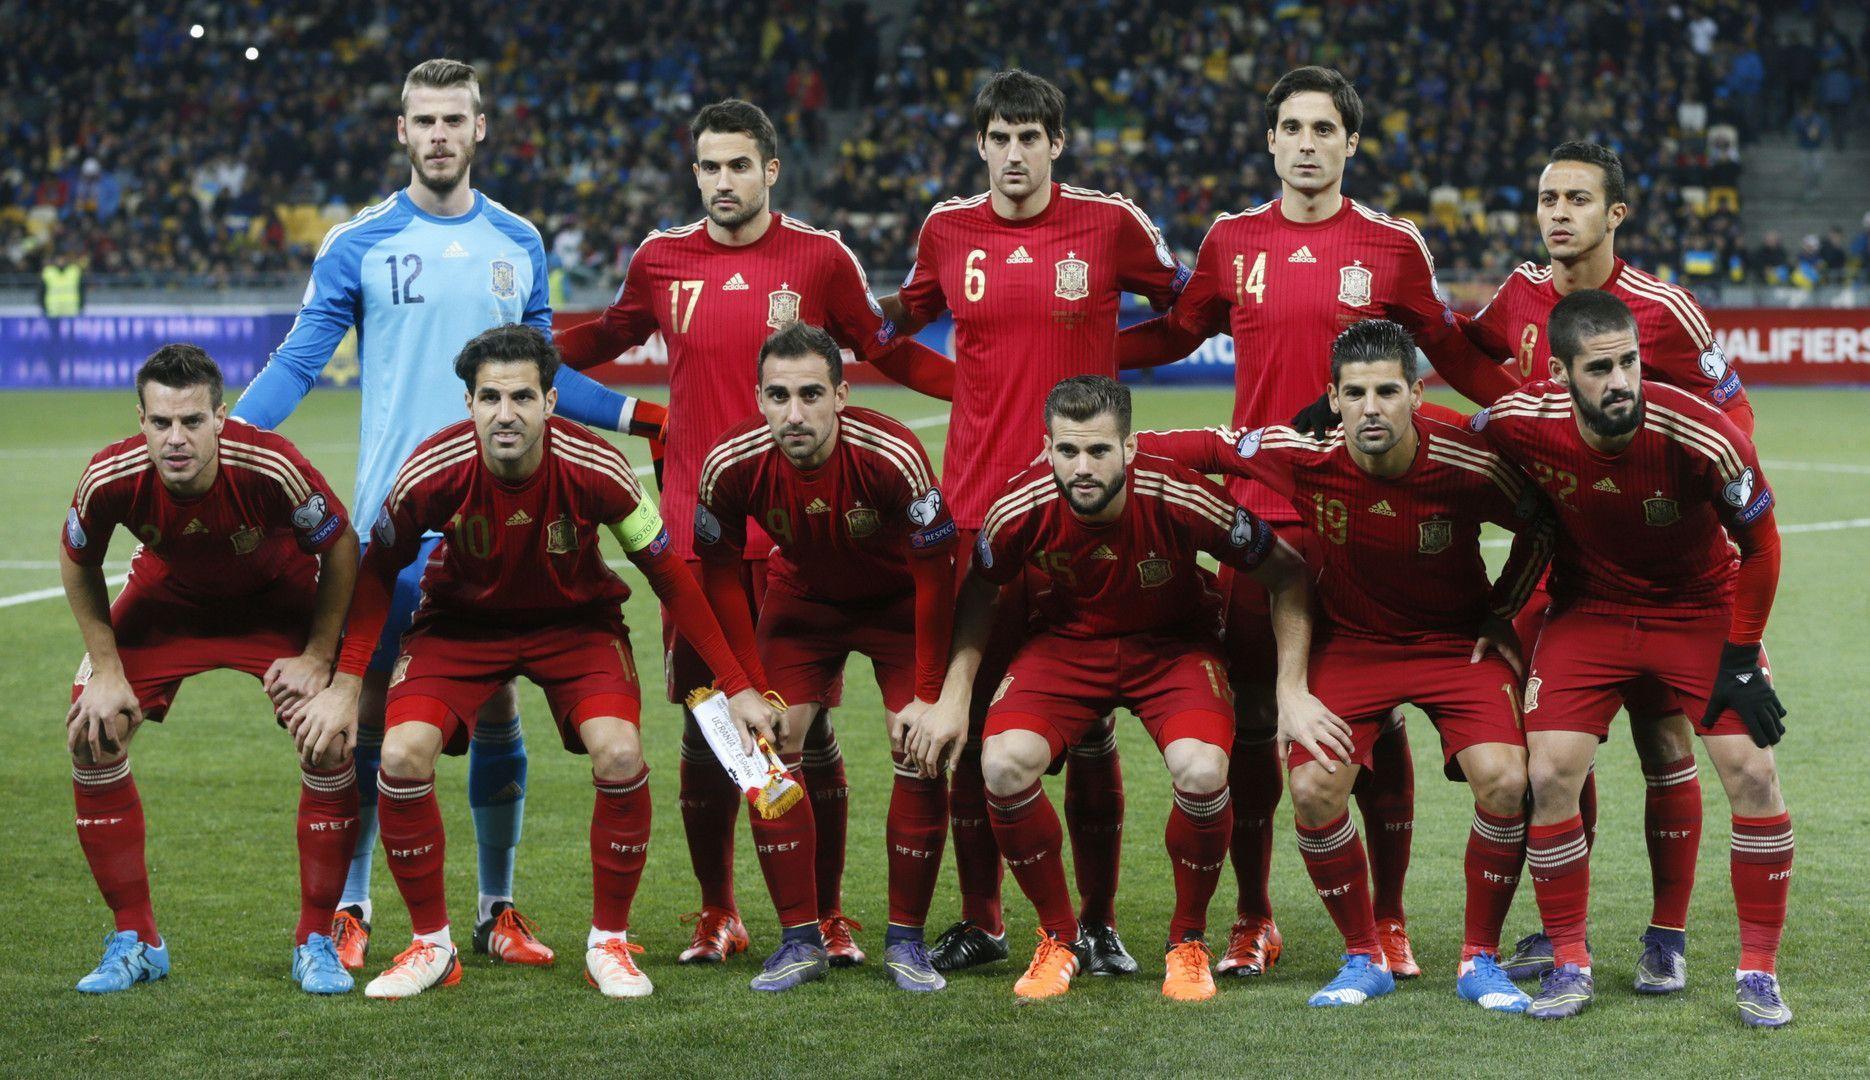 Photo of Spain National Football Squad 2016 for Wallpapers